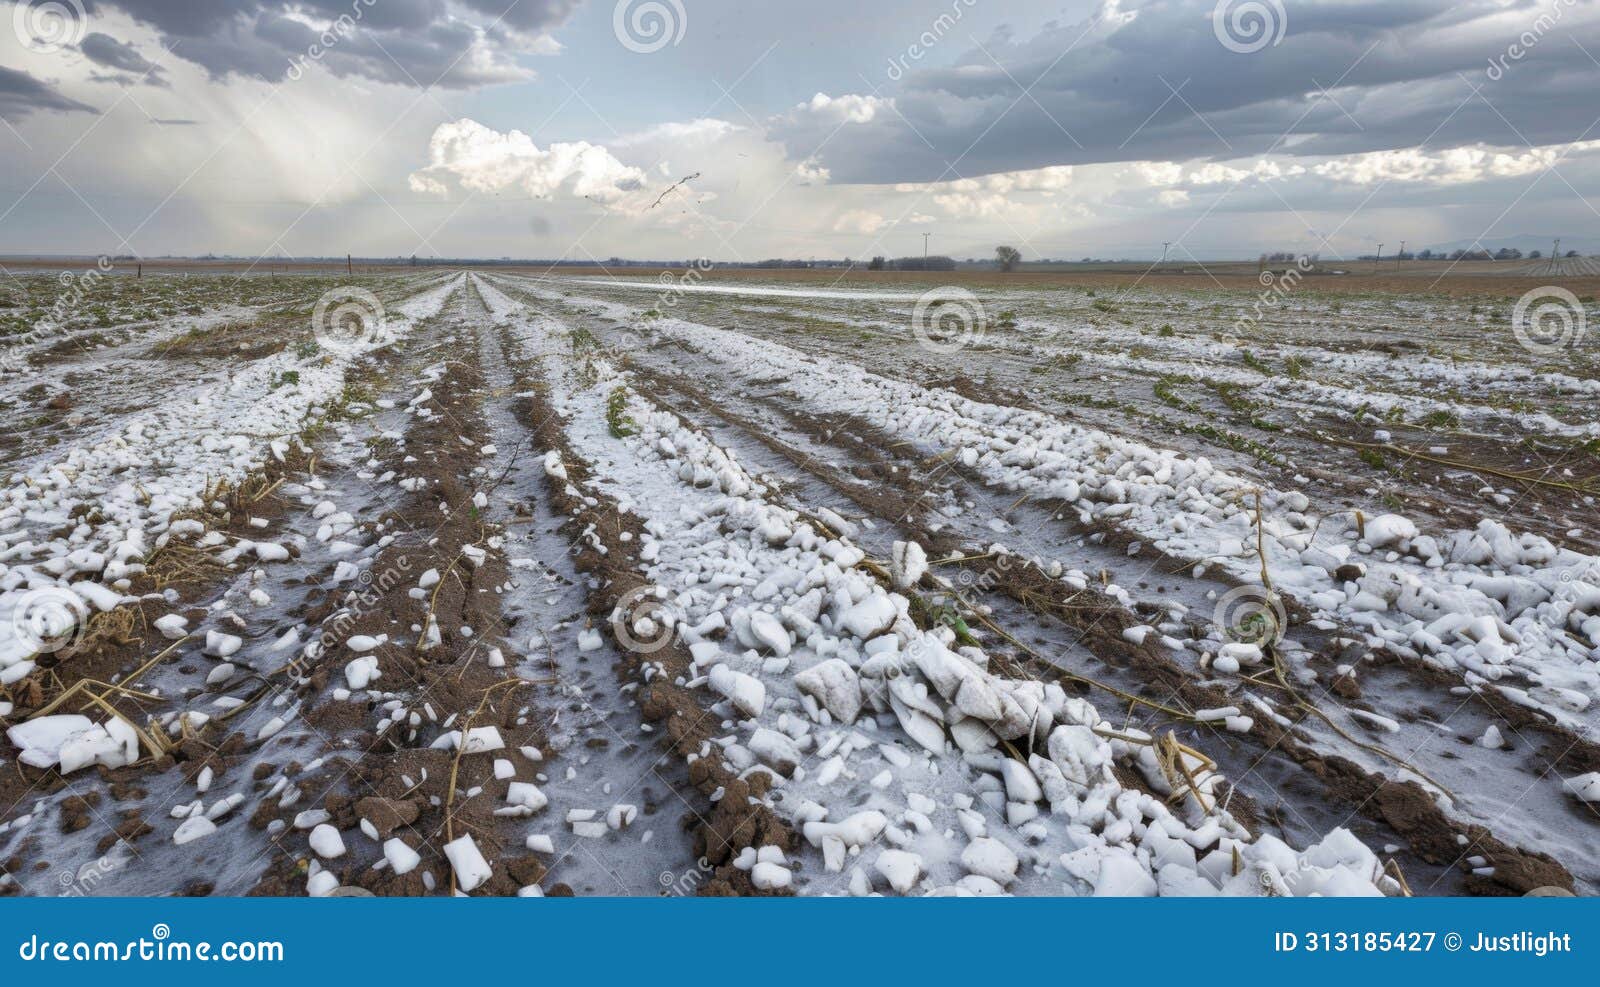 the quietness after a hailstorm seems almost surreal as shards of ice litter the ground and ruined crops lay in disarray